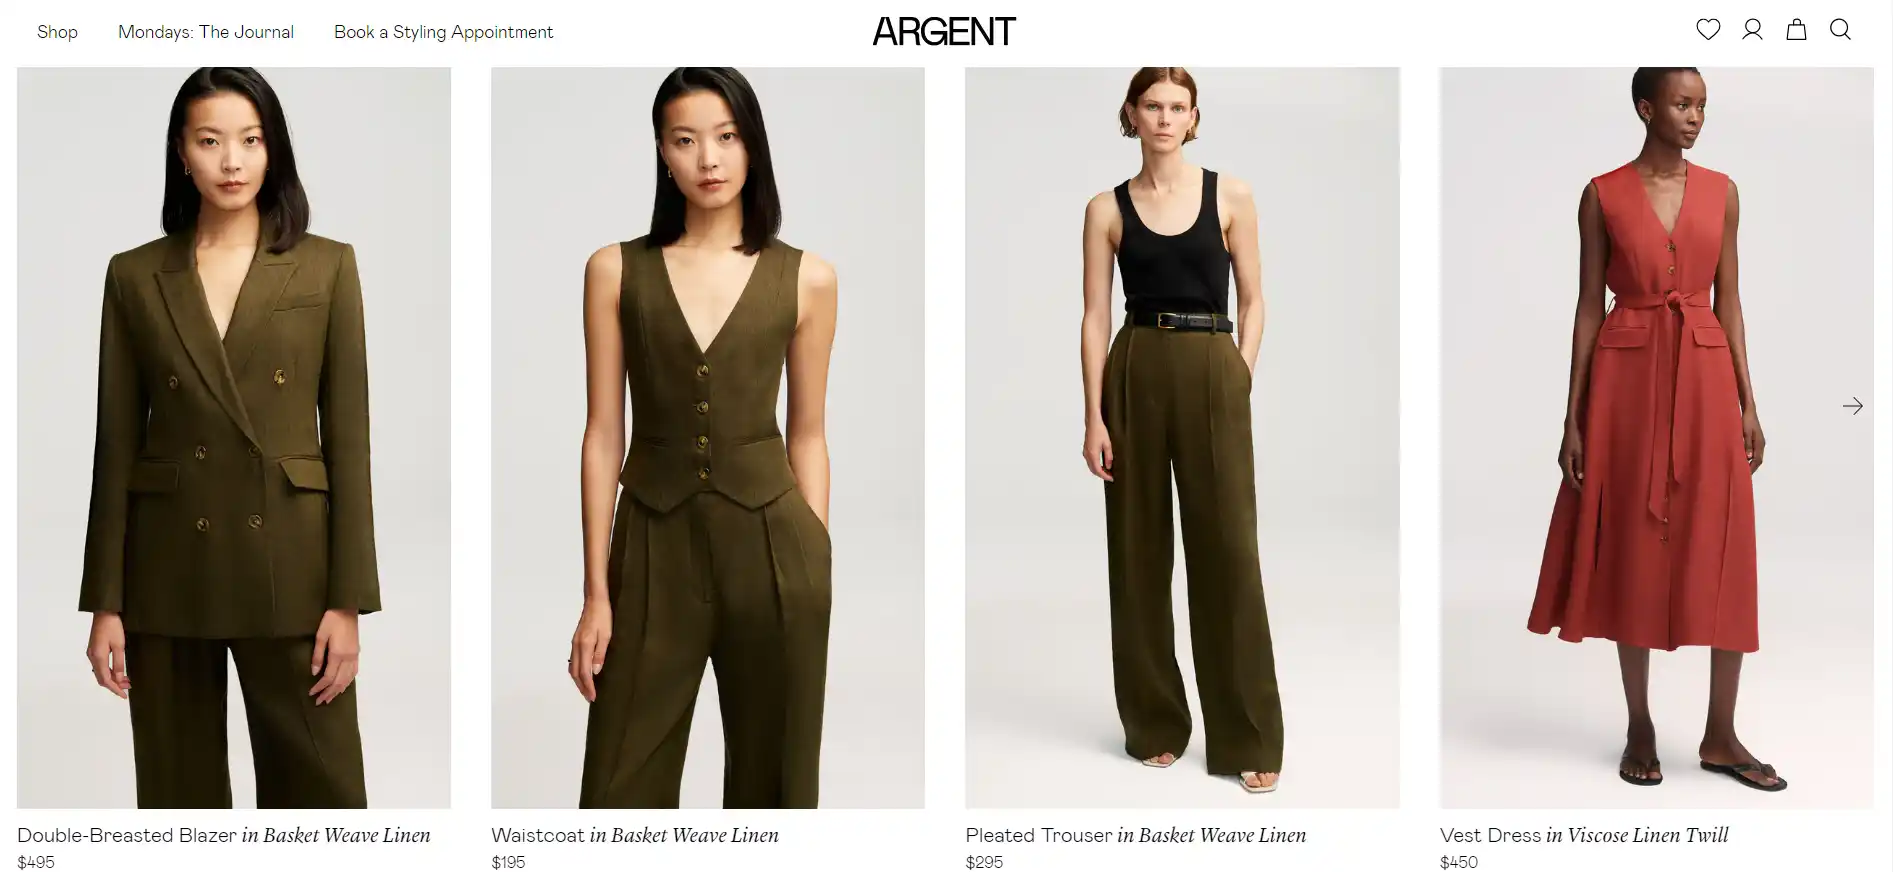 You are currently viewing Argent Clothing Reviews: Legit Fashion Brand or Scam?